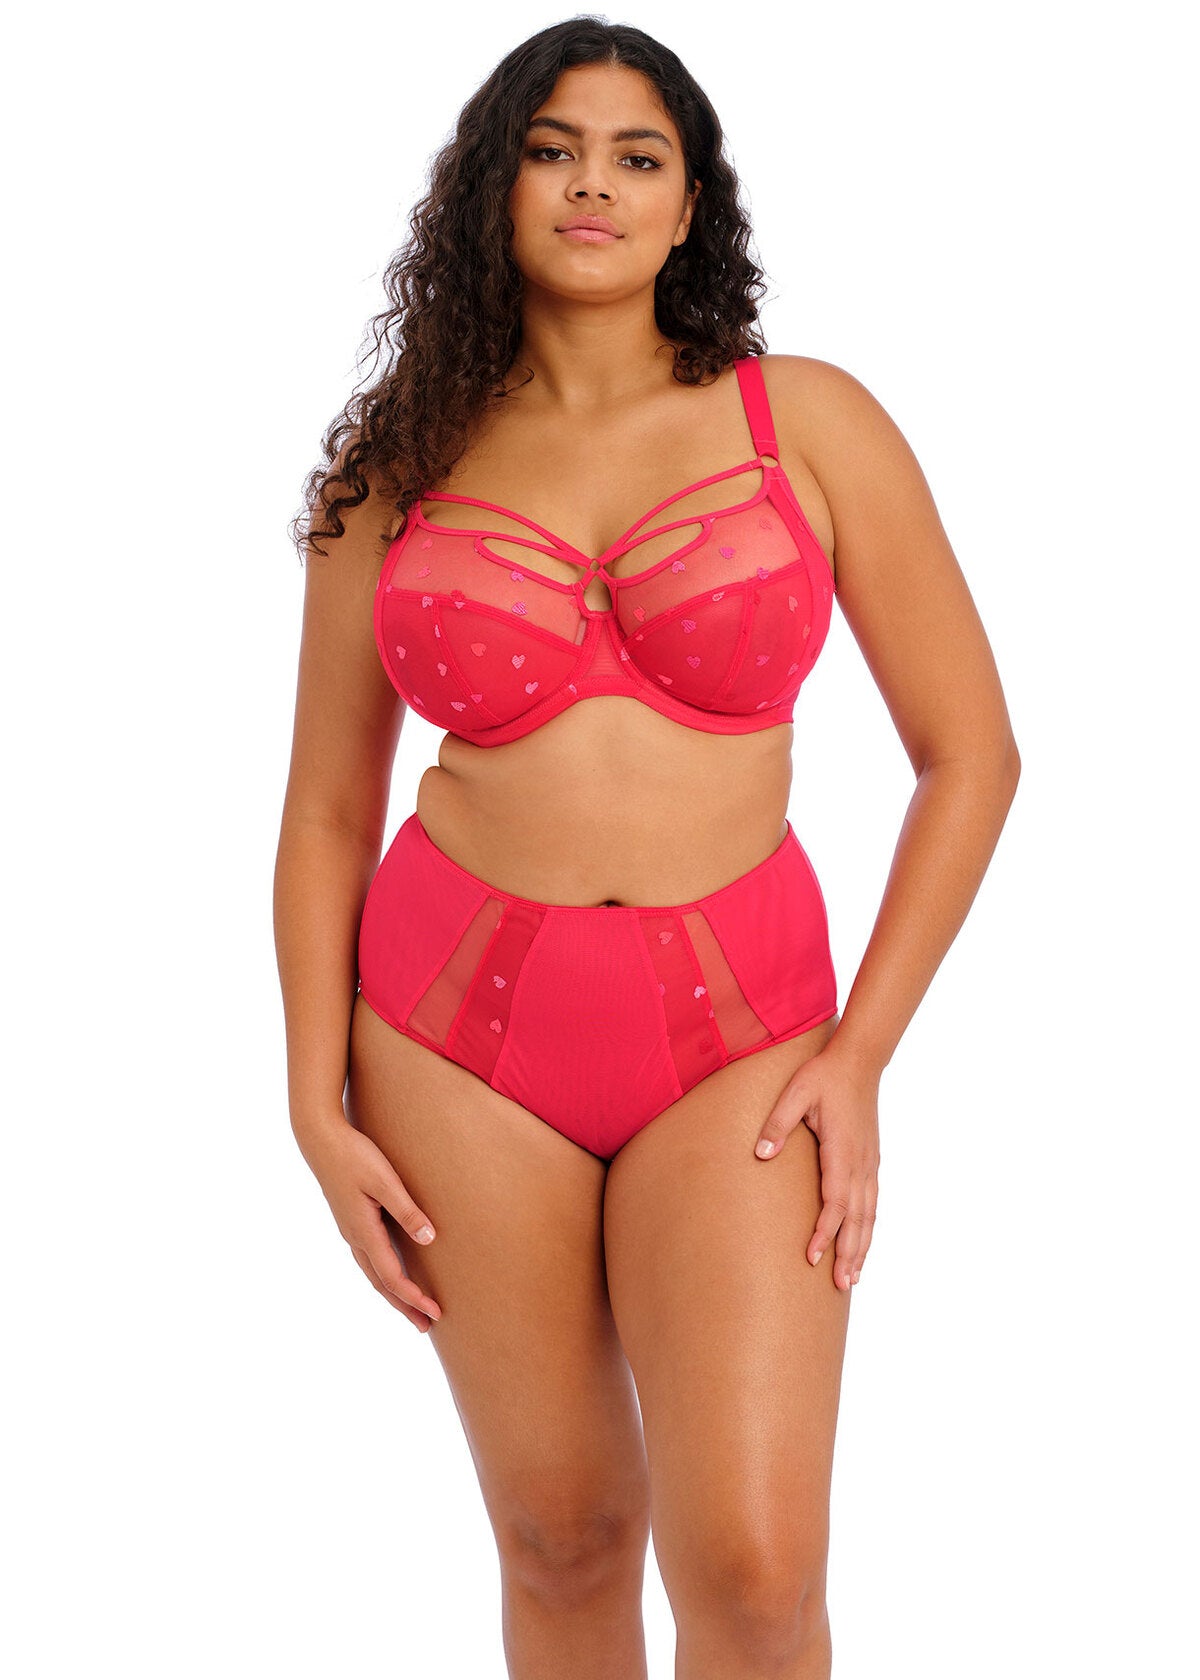 Joburg's Plus-size Bra Fitting Specialist on X: @sindivanzyl We are a Bra  boutique based in Midrand Johannesburg and we also do house calls, helping  big busted women get their perfect fitting Bras